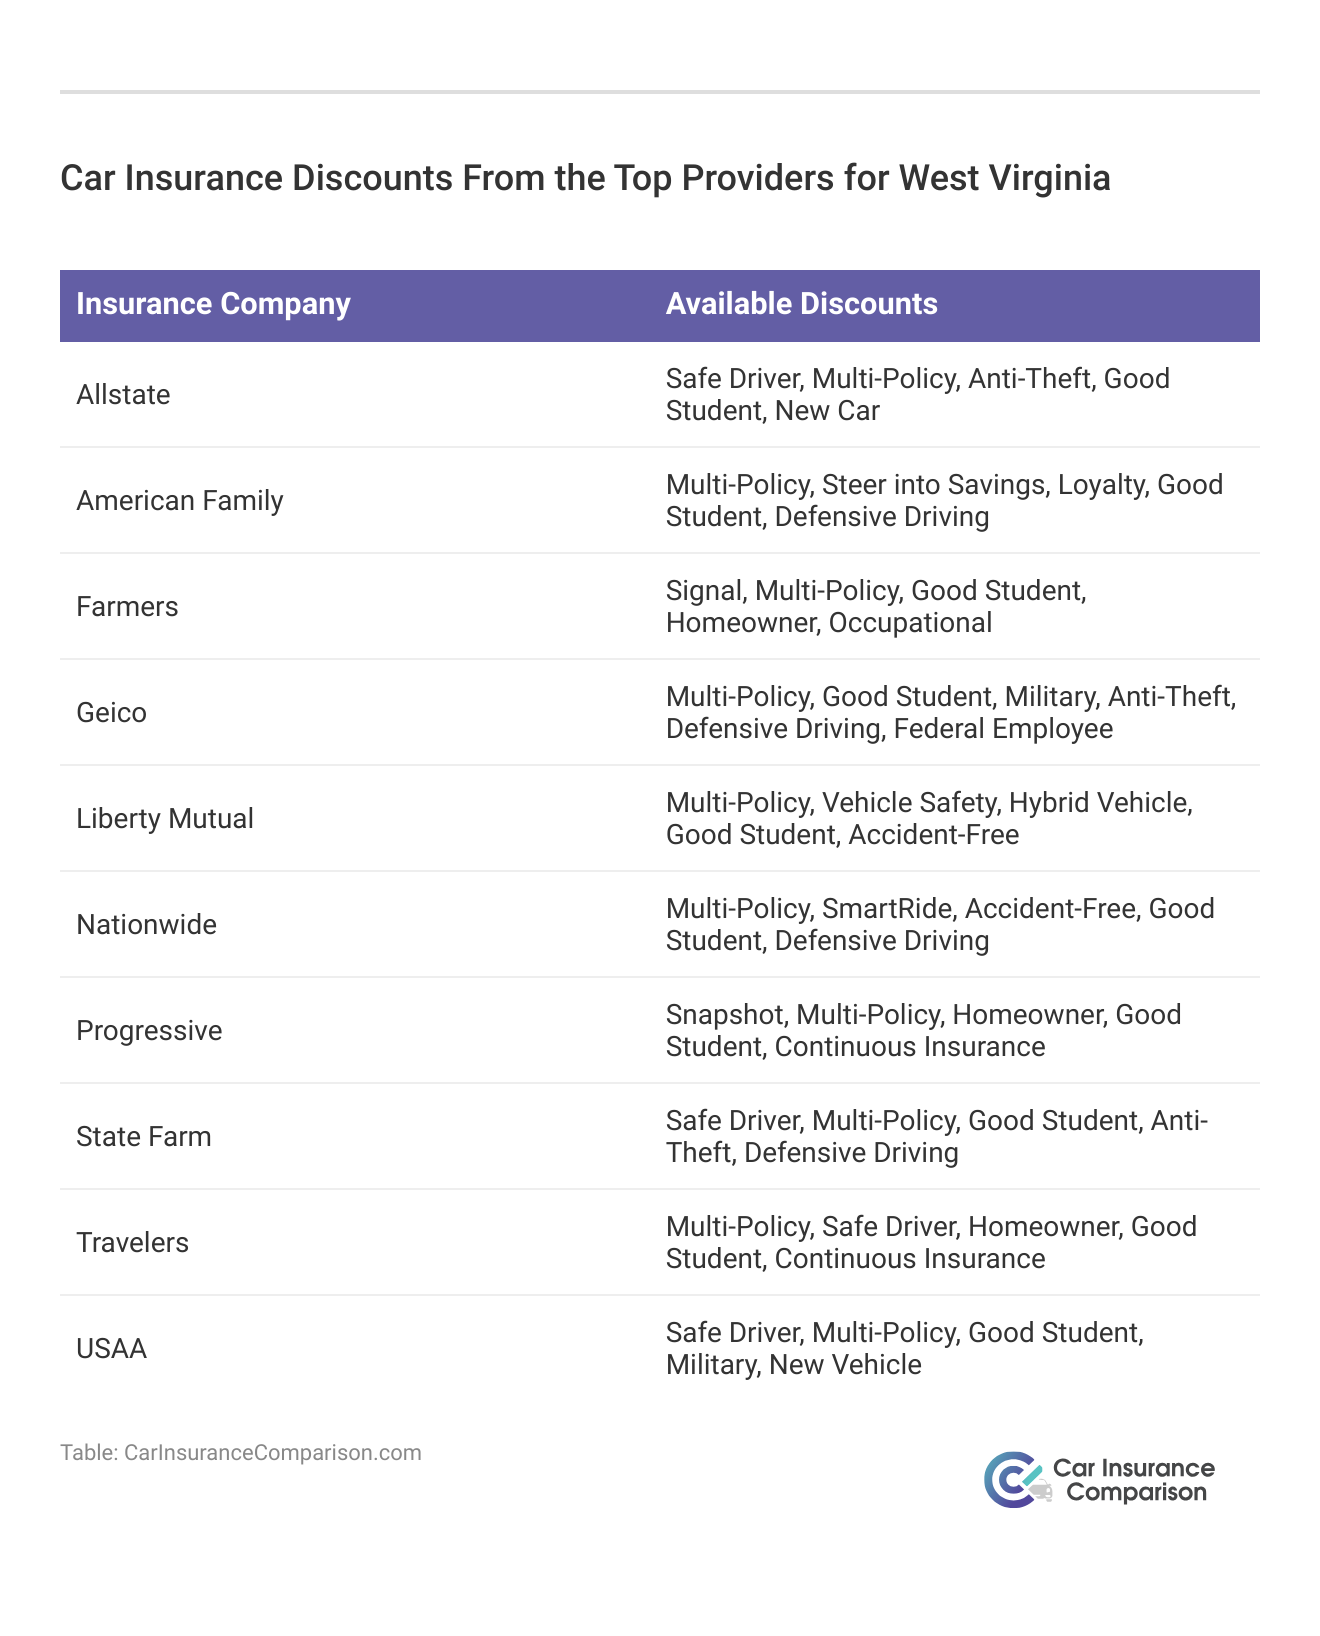 <h3>Car Insurance Discounts From the Top Providers for West Virginia</h3>